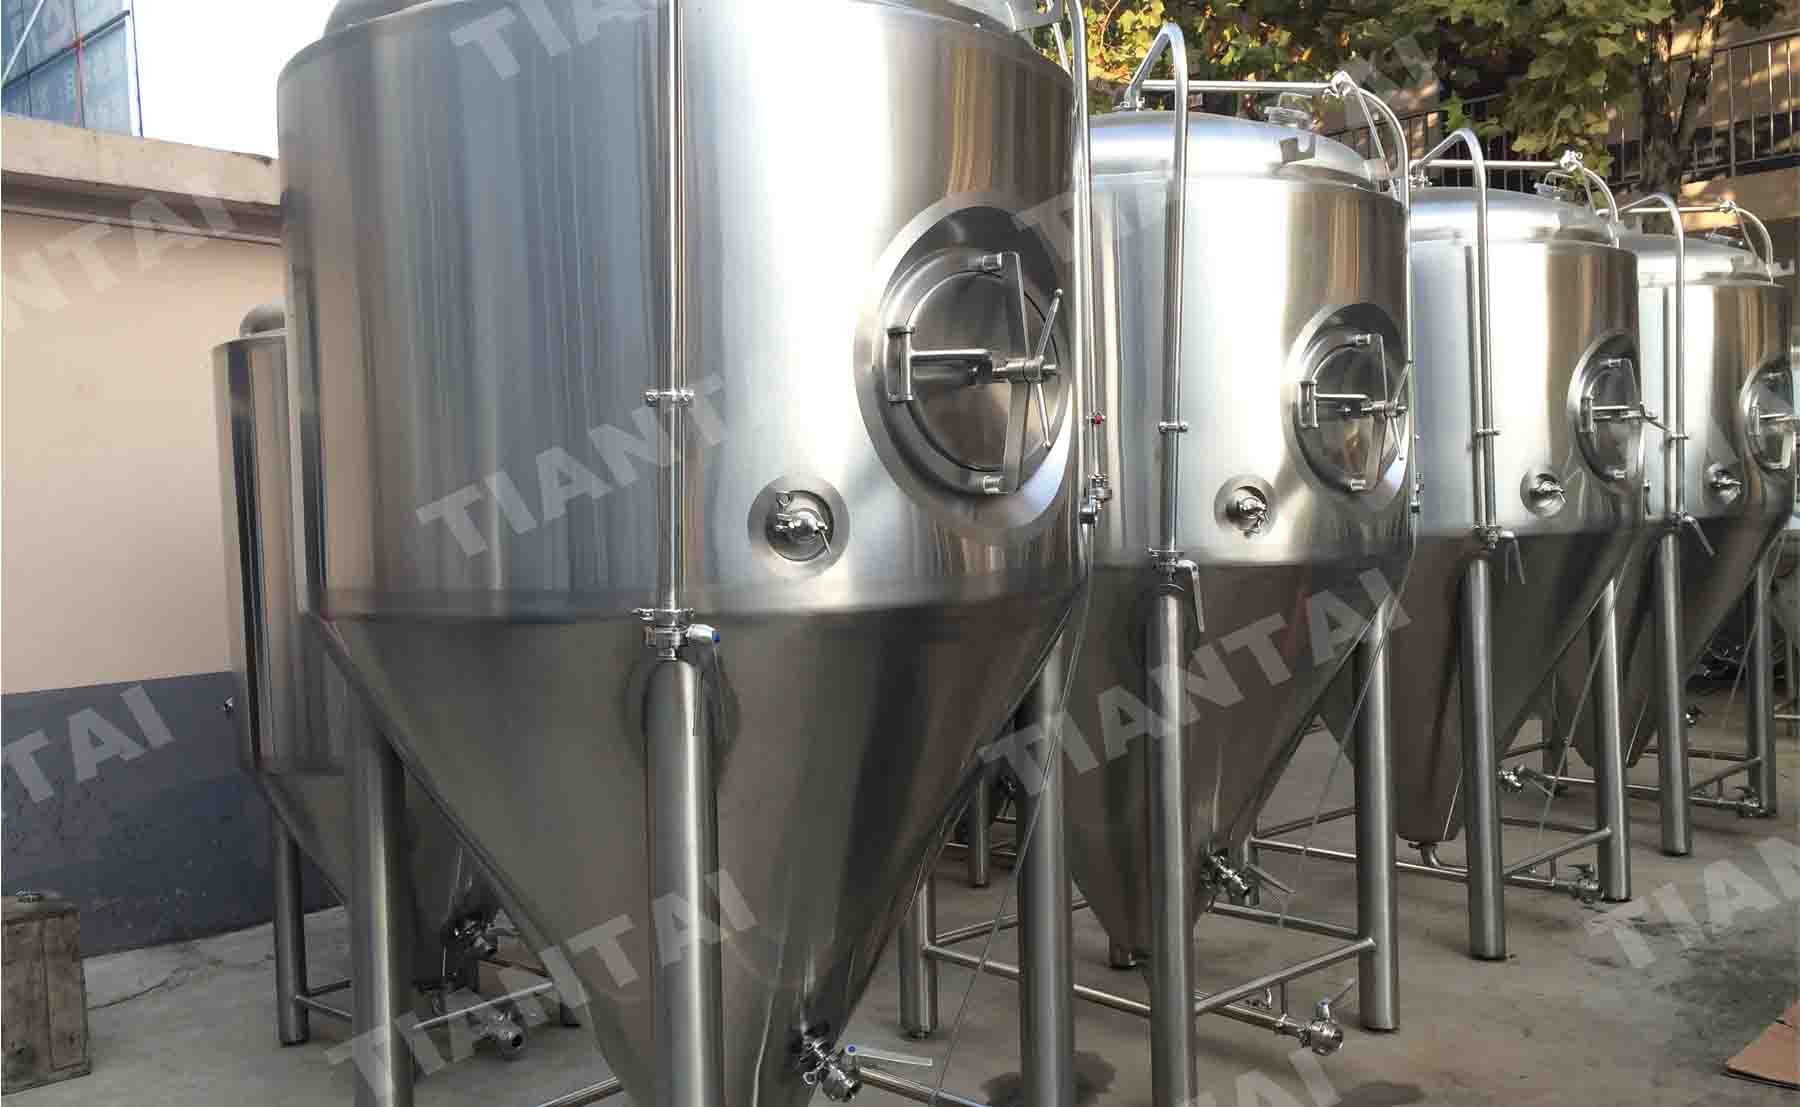 What will cause negative pressure in the fermenters?  .